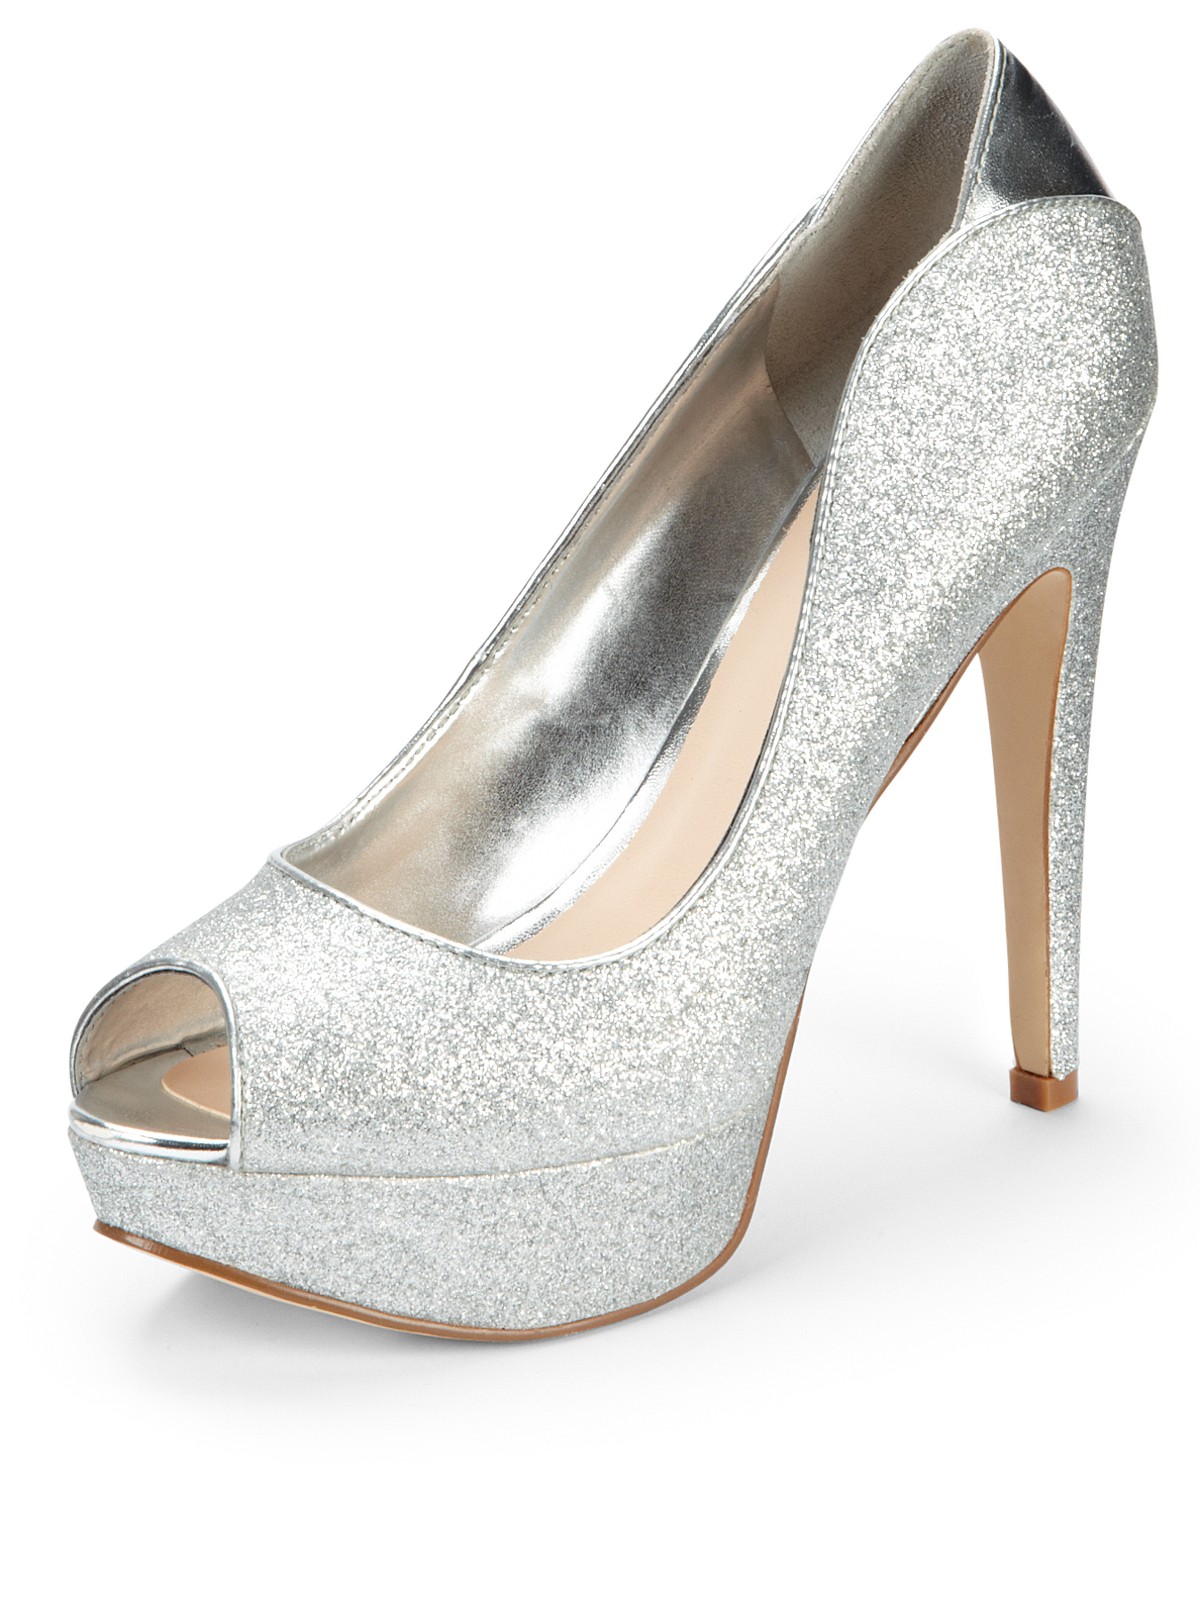 Guess Guess Ashner Peep Toe Shoes in Silver | Lyst